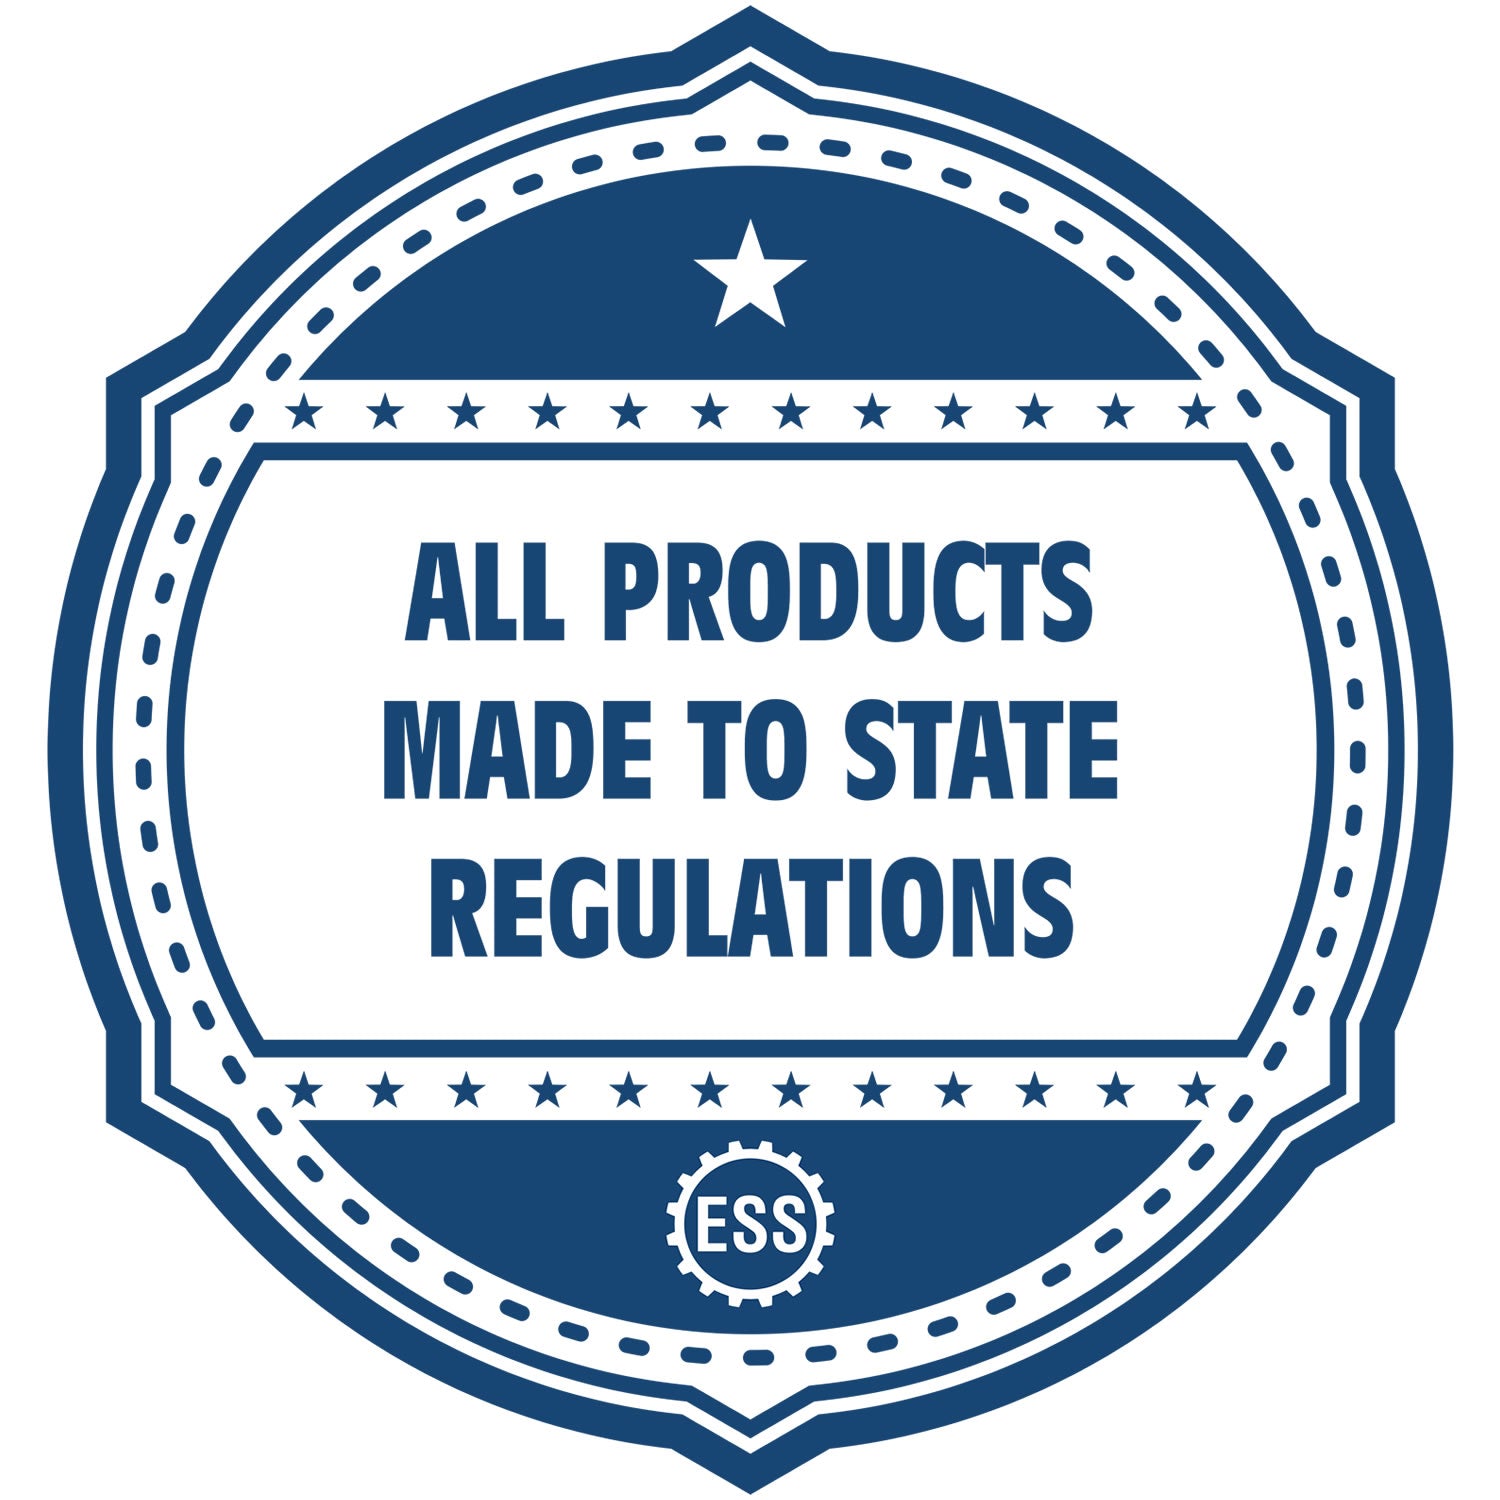 An icon or badge element for the New York Landscape Architectural Seal Stamp showing that this product is made in compliance with state regulations.